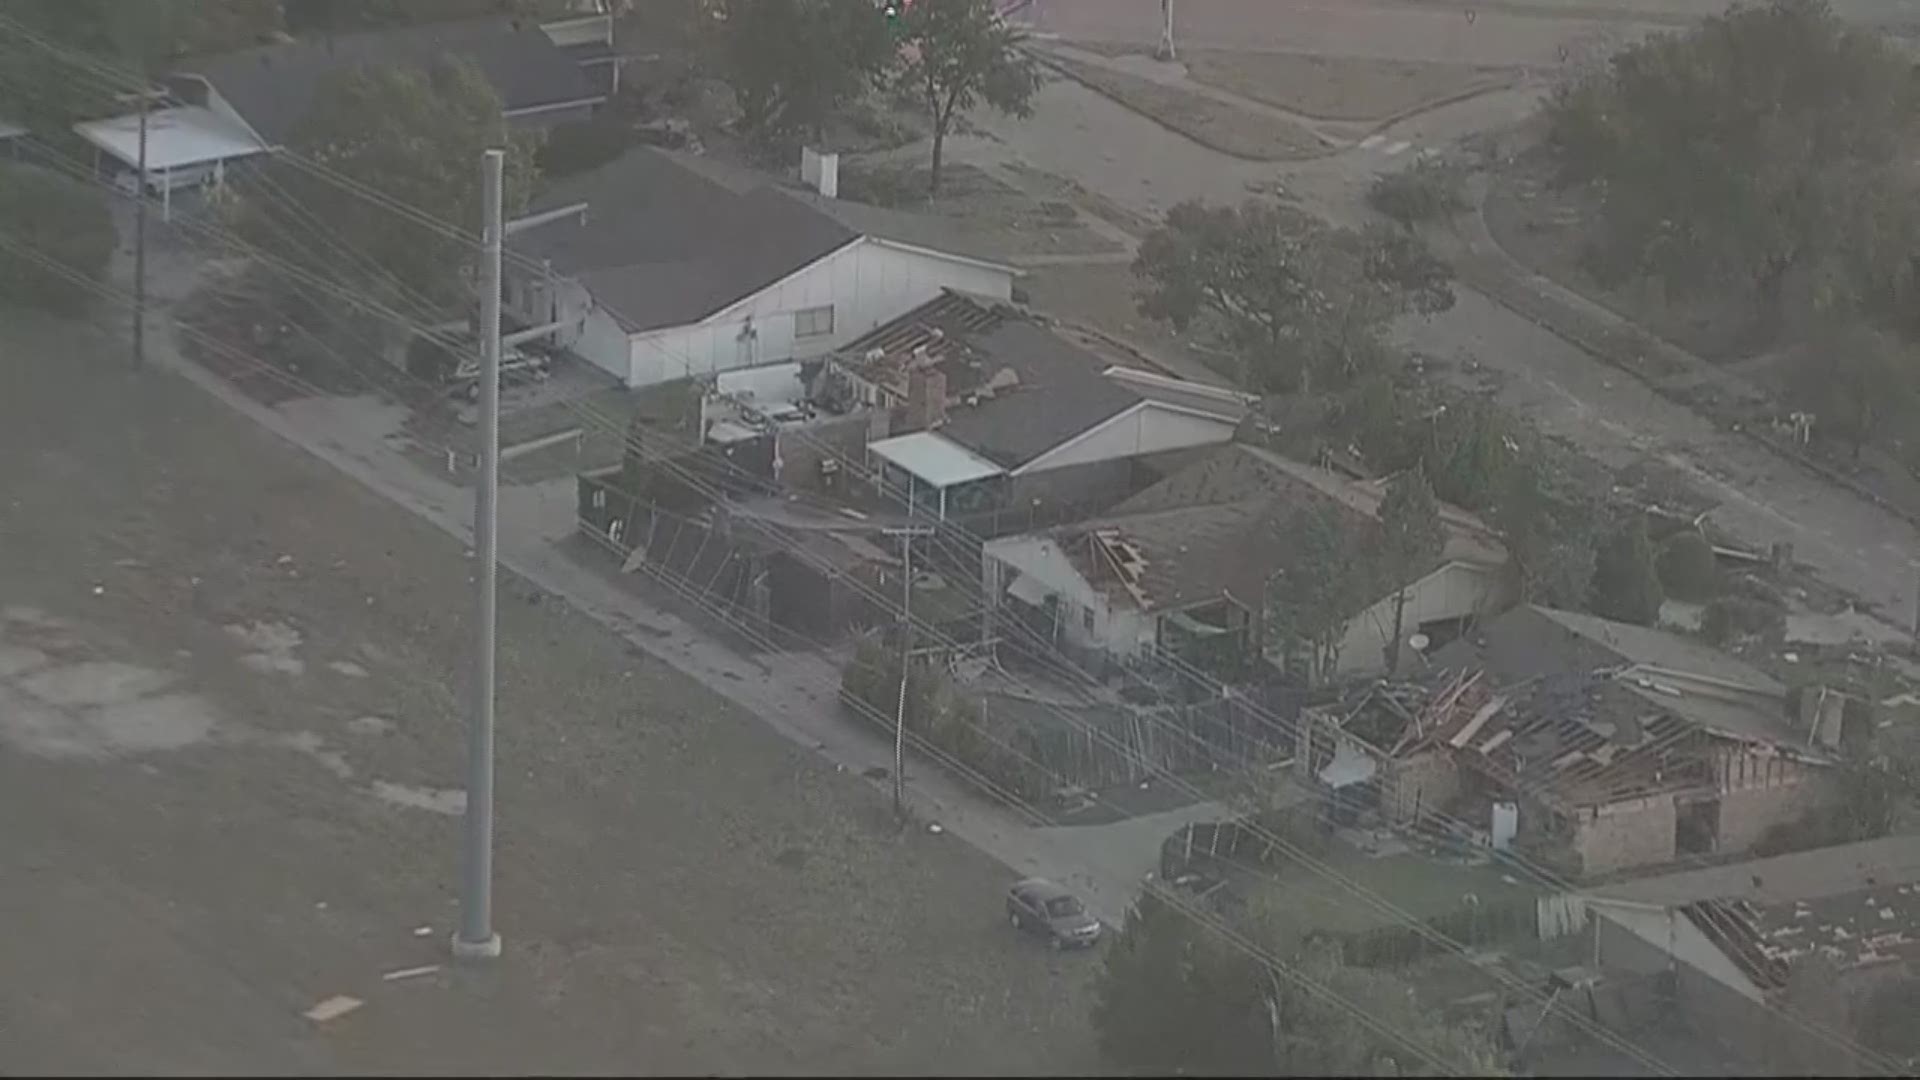 See extent of damage from Sunday's storm in Dallas